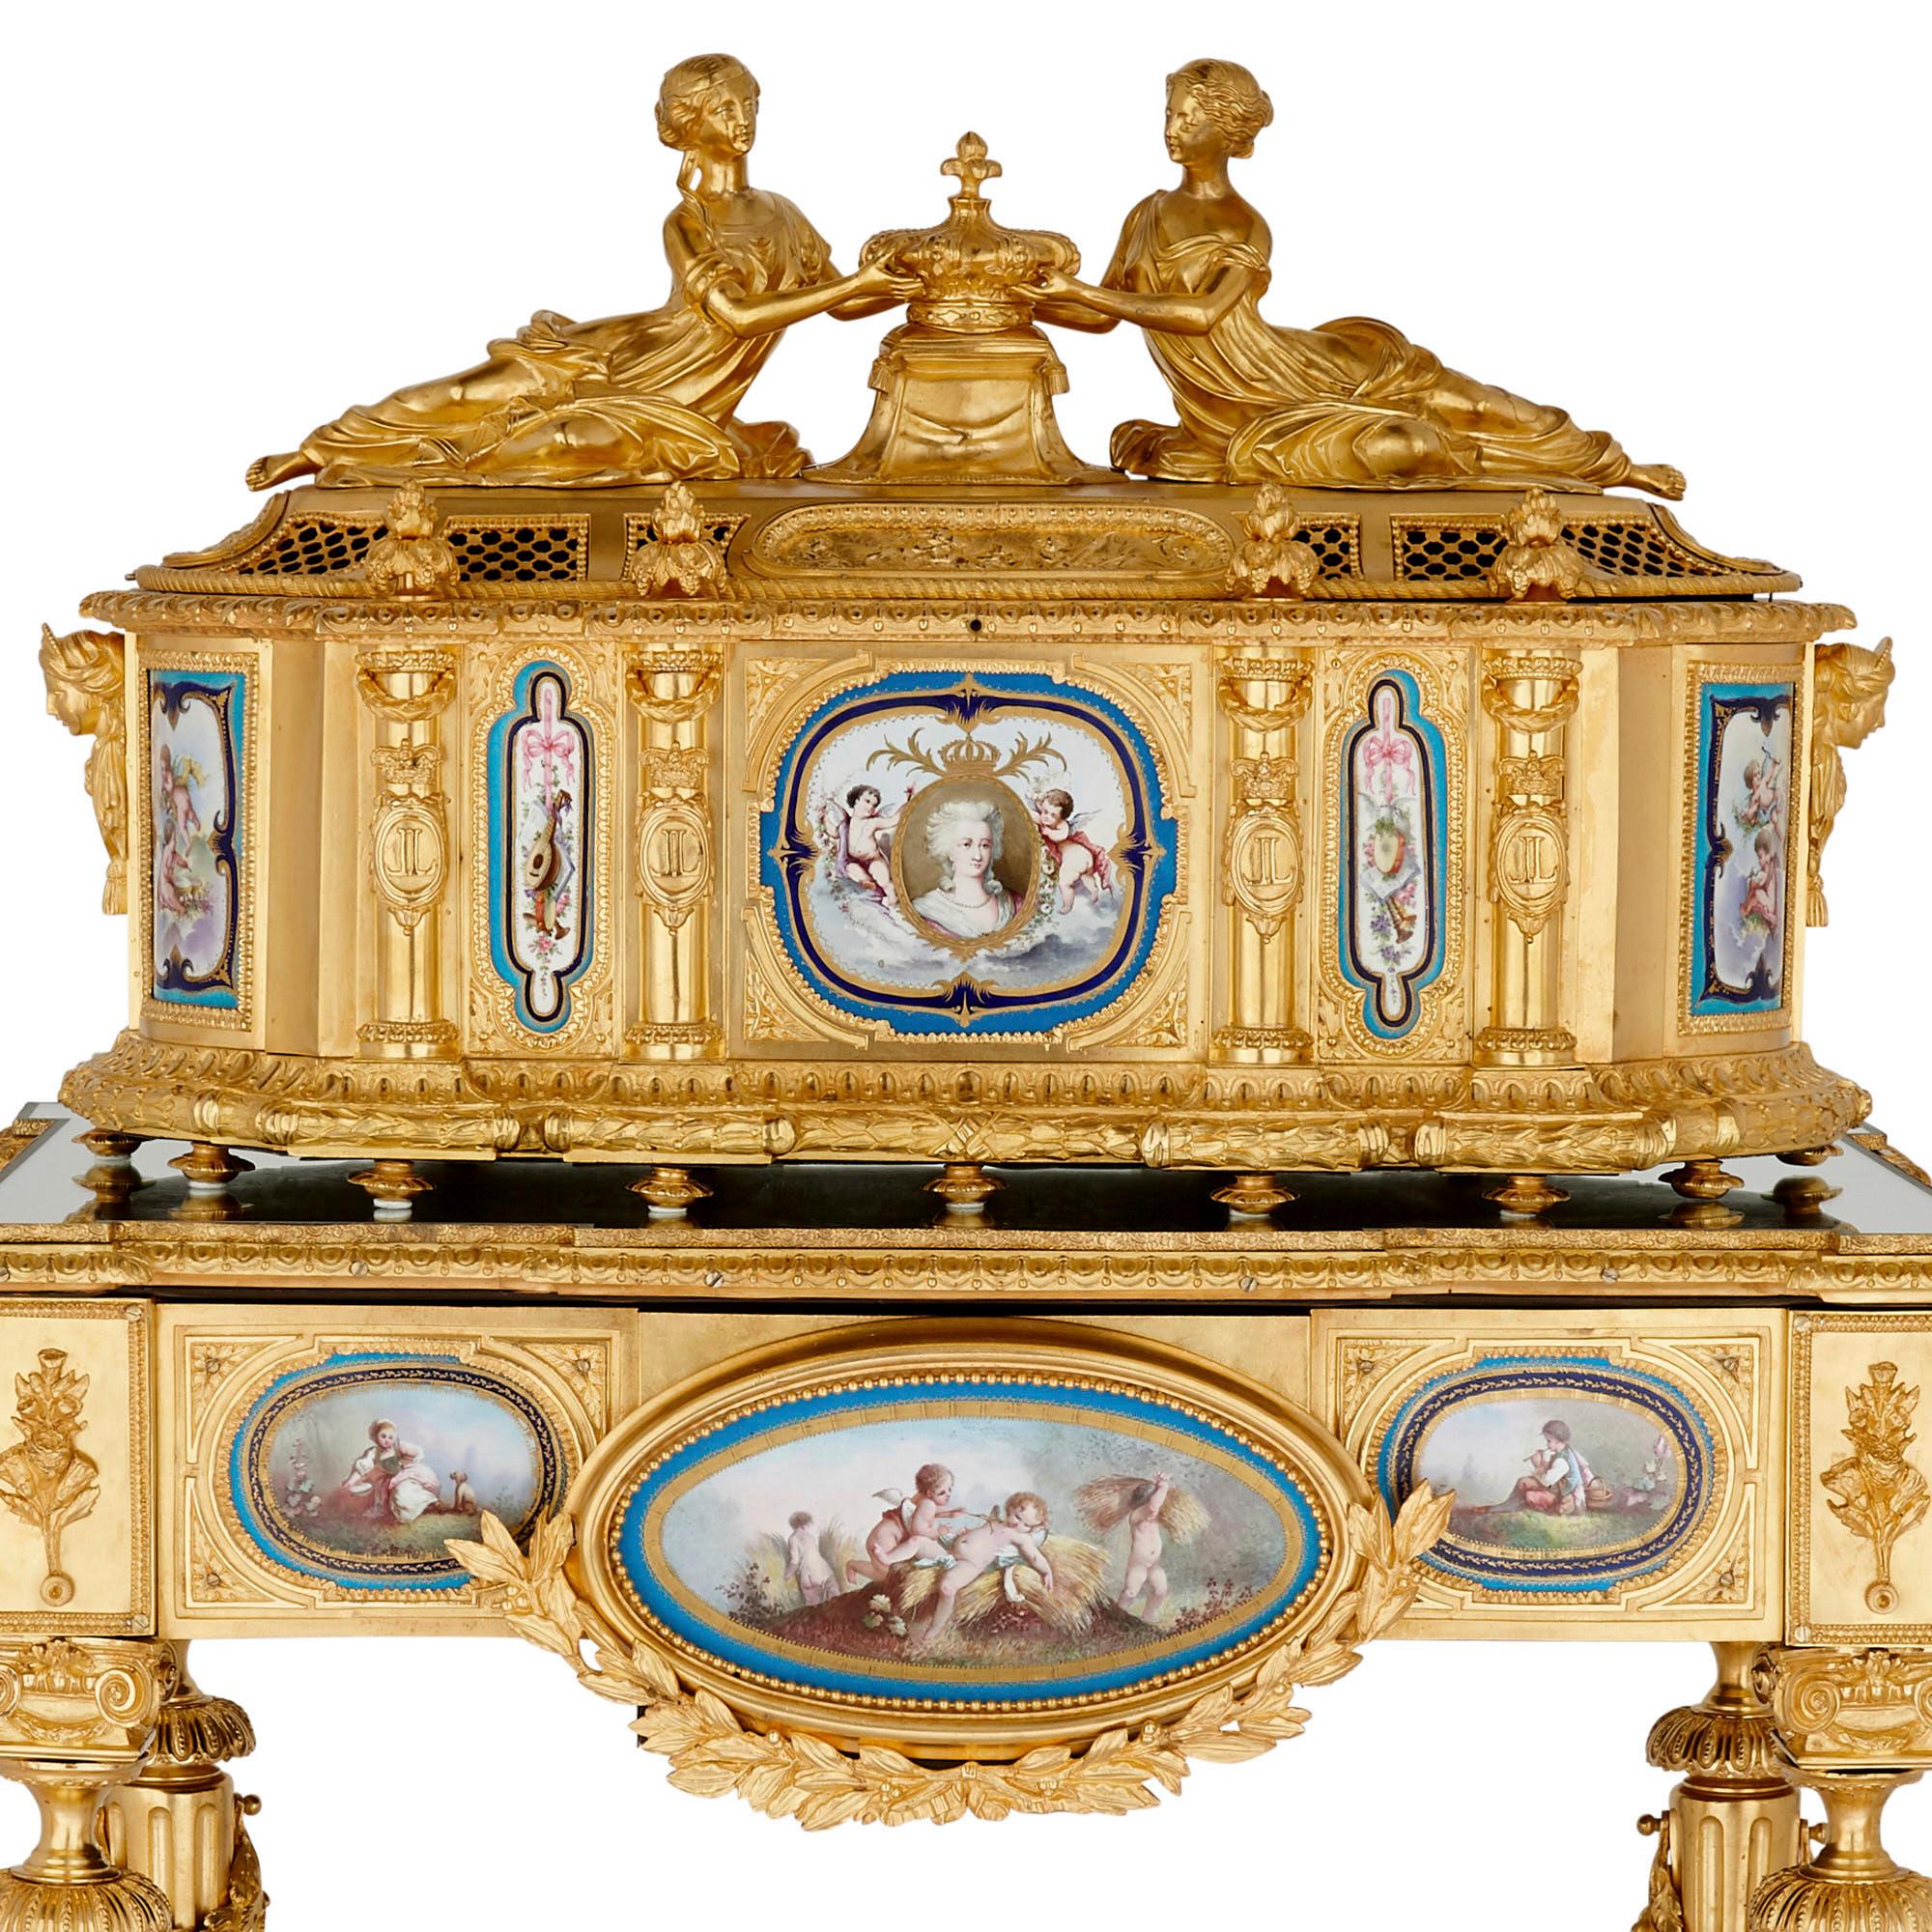 Gilt bronze and Sèvres style porcelain Louis XVI style casket on stand

This magnificent Louis XVI style ormolu casket is supported by a mirror-topped table stand, which sits on four tapered, fluted legs connected by a curving X-form stretcher. In